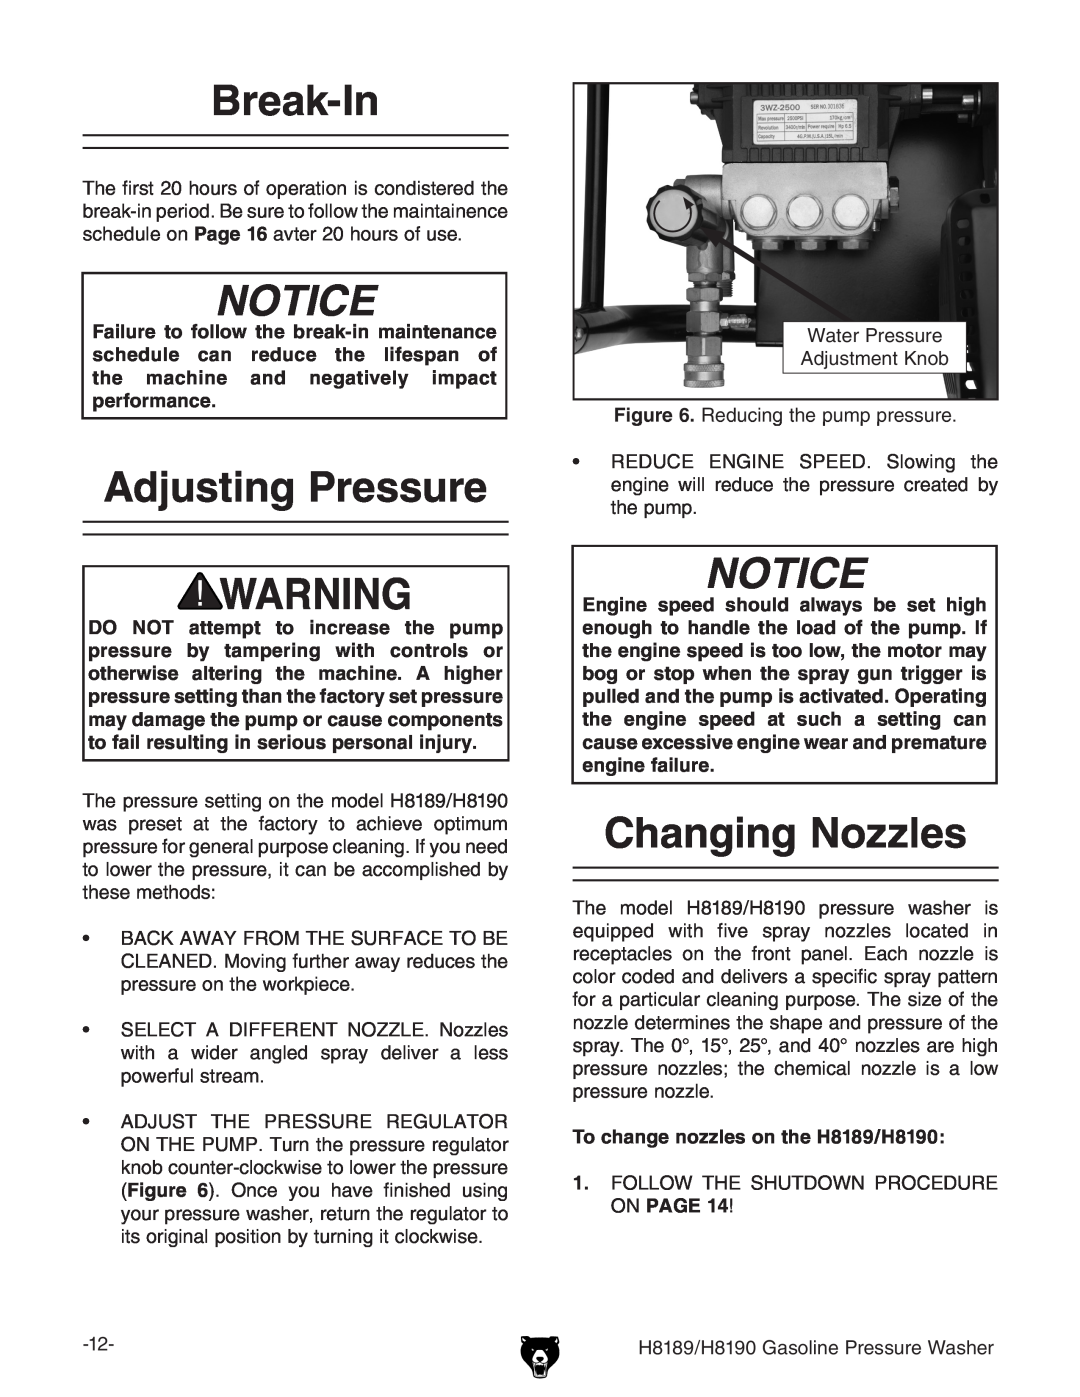 Grizzly H8189/H8190 owner manual Break-In, Notice, Adjusting Pressure, Changing Nozzles 